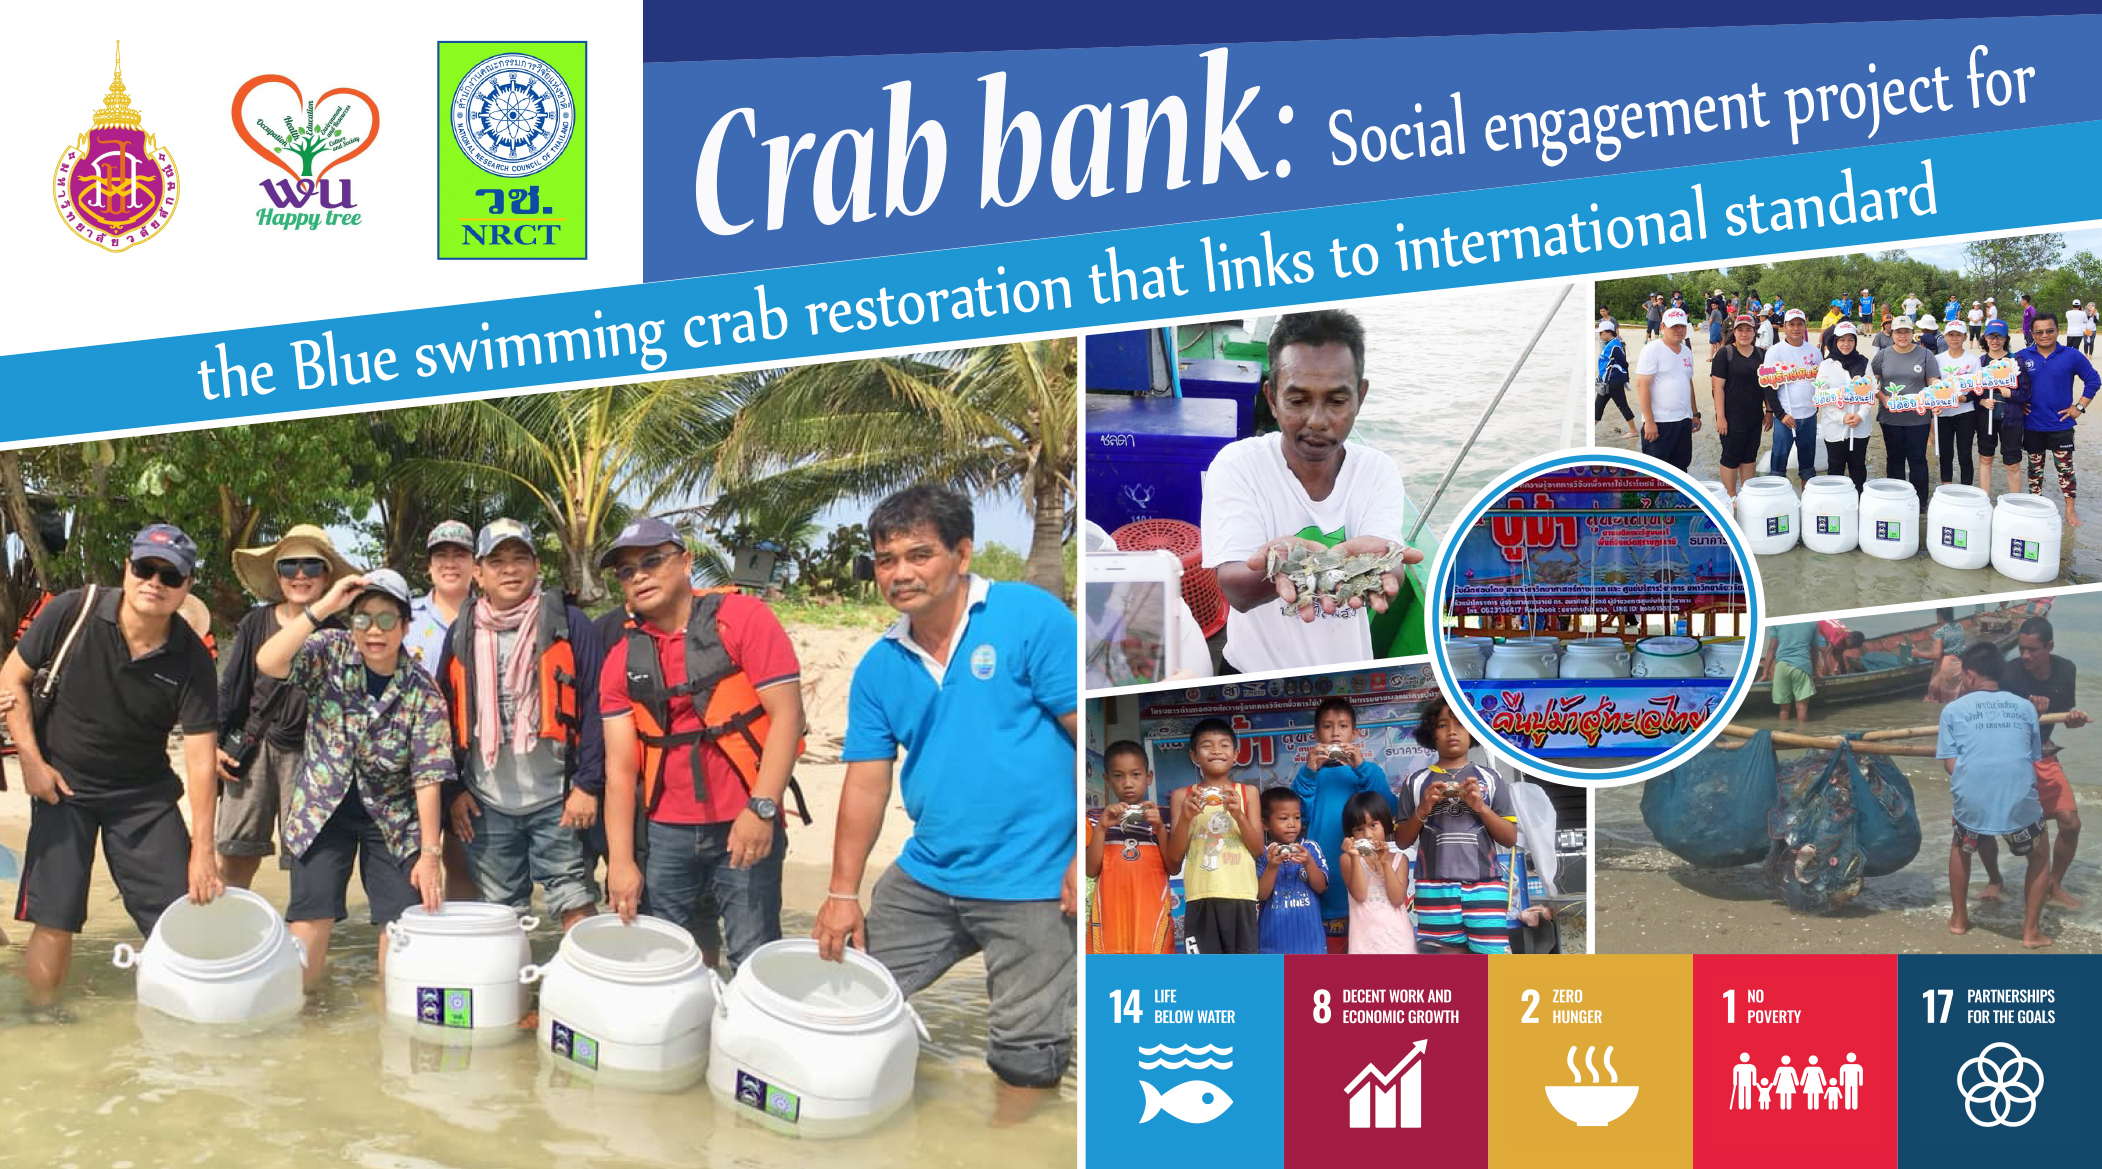 Crab Bank: Social engagement project for the blue swimming crab restoration that links to international standard